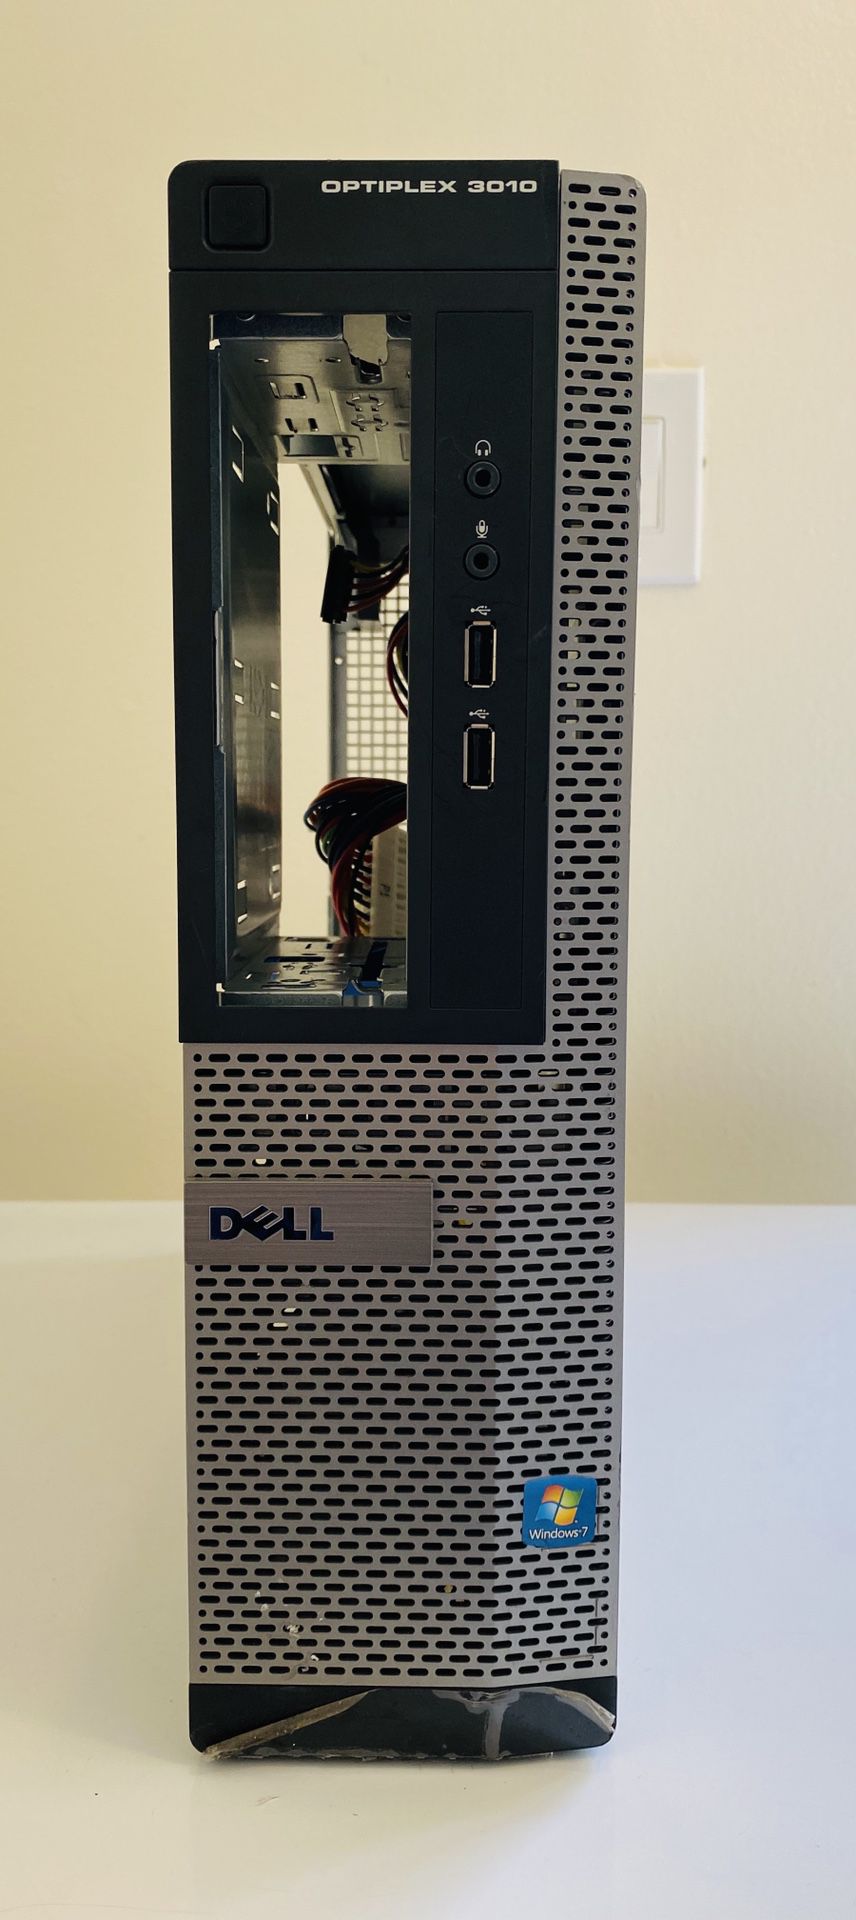 FREE, FREE, Freee !!! DELL OPTIPLEX Computer Case with 24 pins Power Supply and SATA Connectors. Come to get it at $0